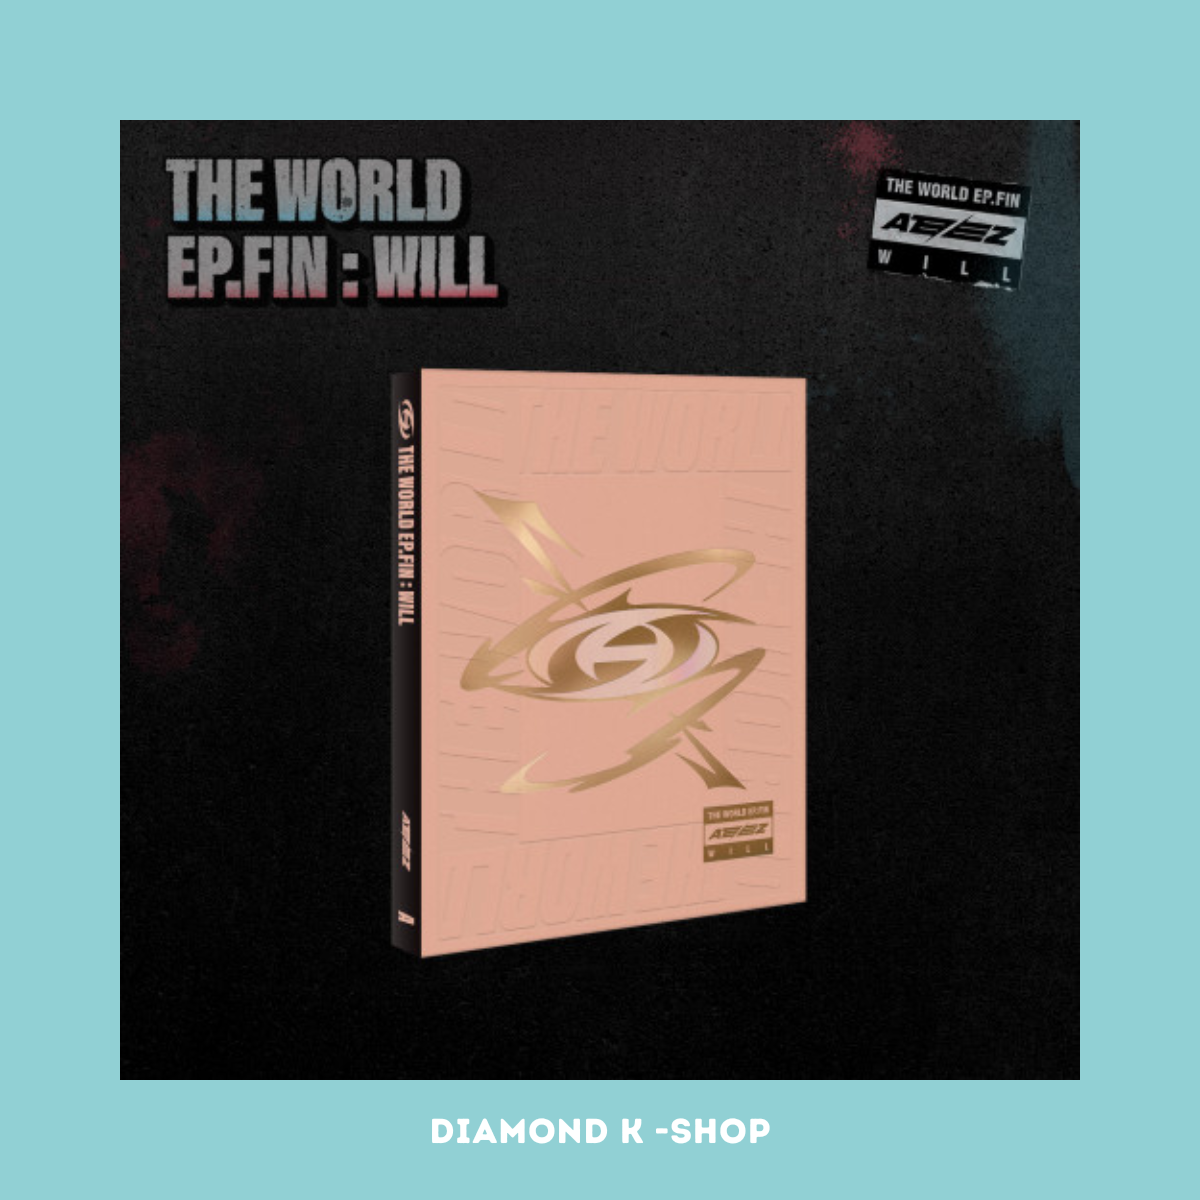 ATEEZ - The World Ep.Fin: Will